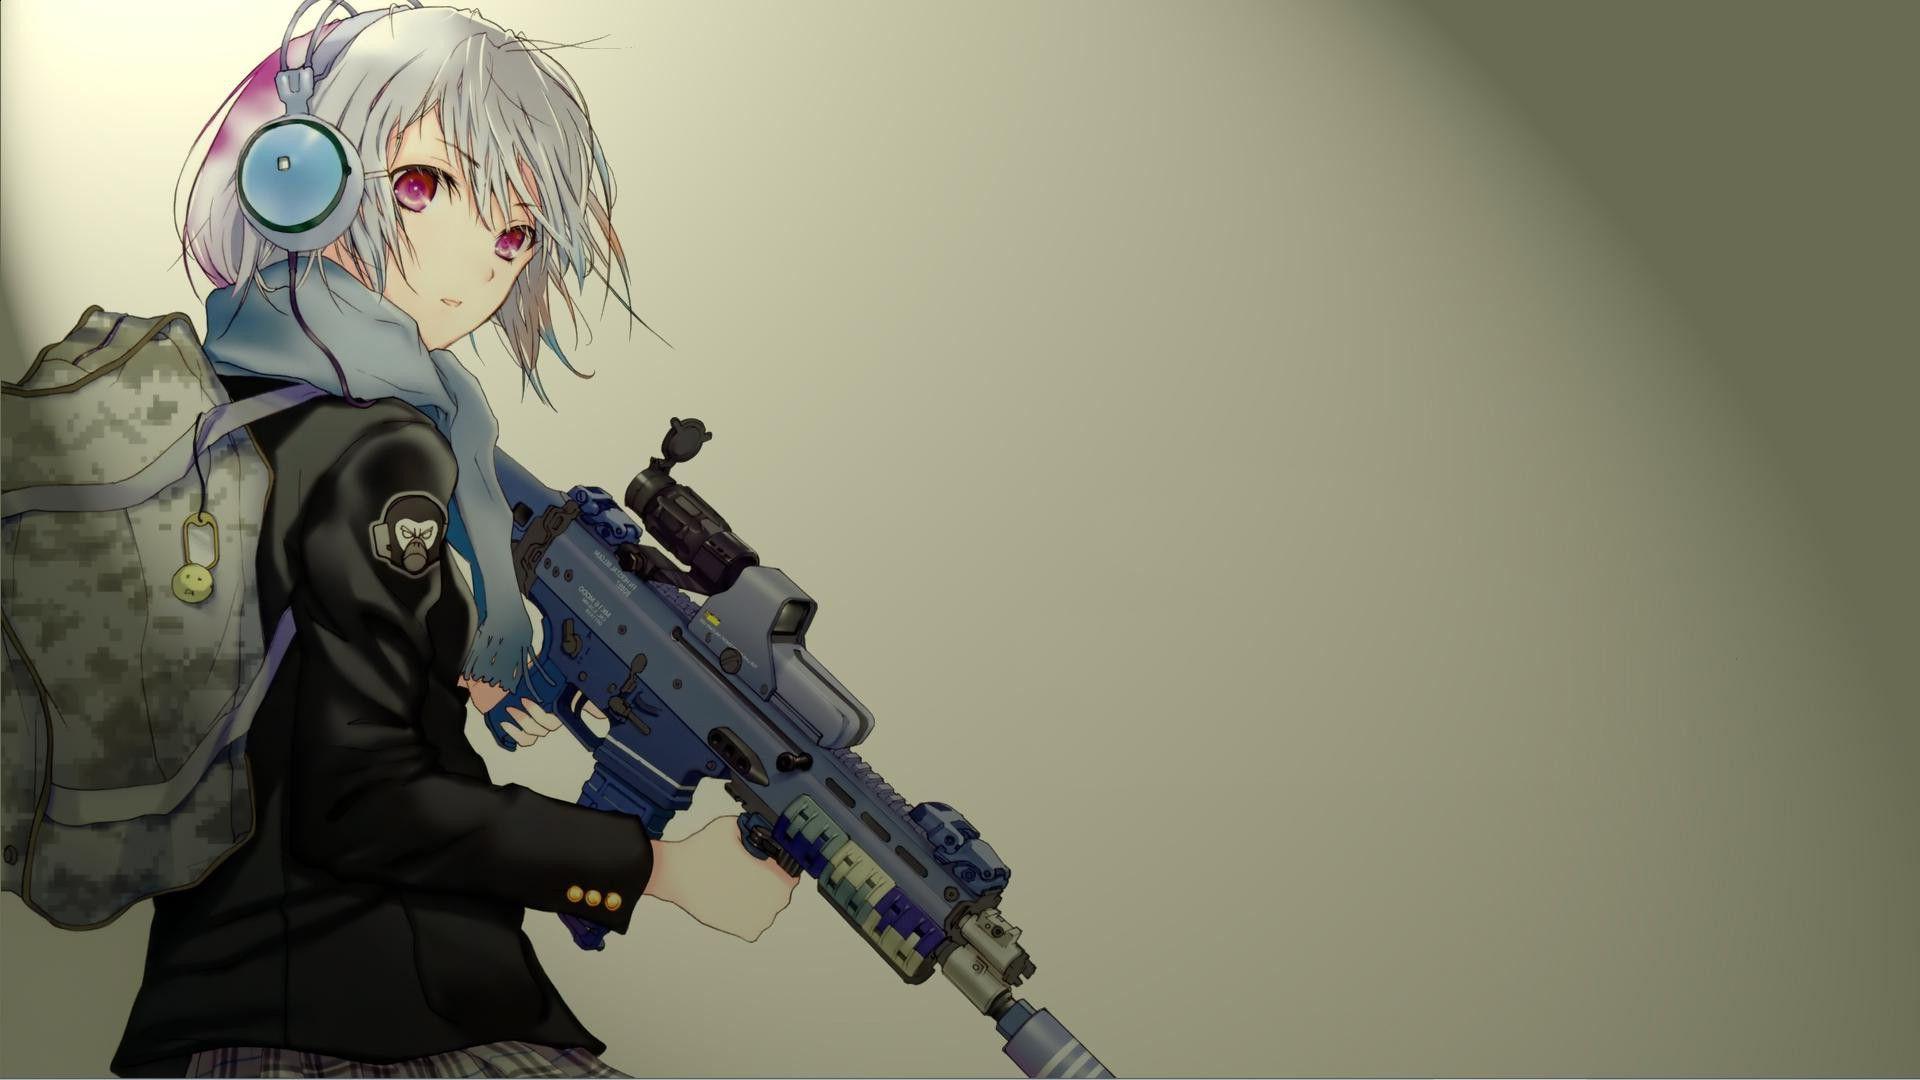 Wallpaper White Haired Male Anime Character Holding Rifle Background   Download Free Image